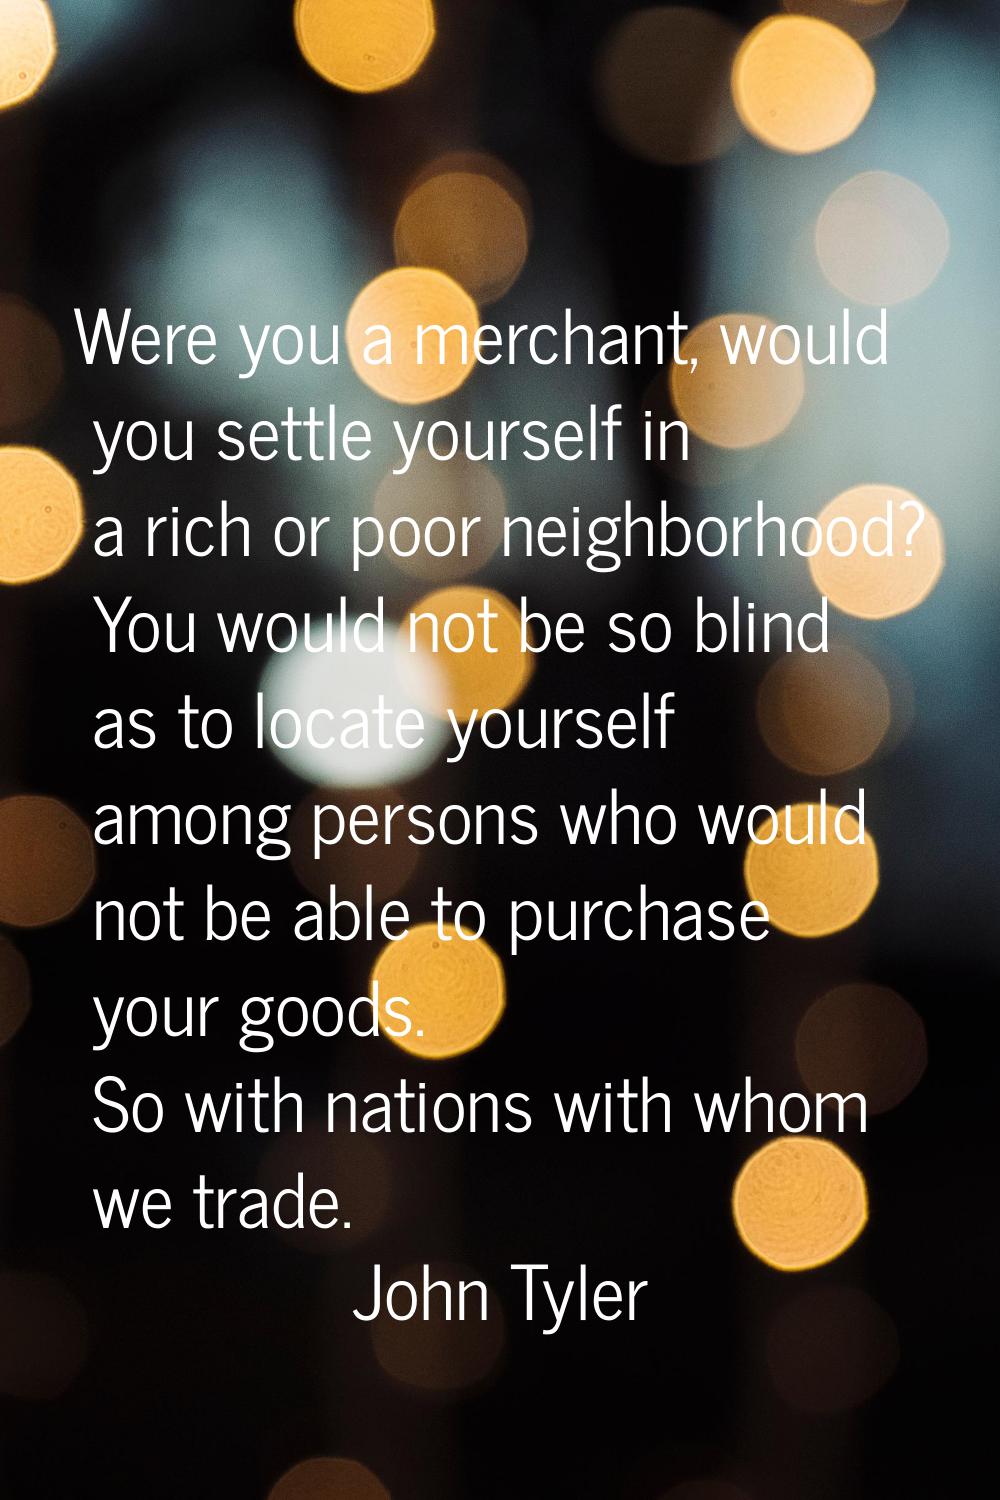 Were you a merchant, would you settle yourself in a rich or poor neighborhood? You would not be so 